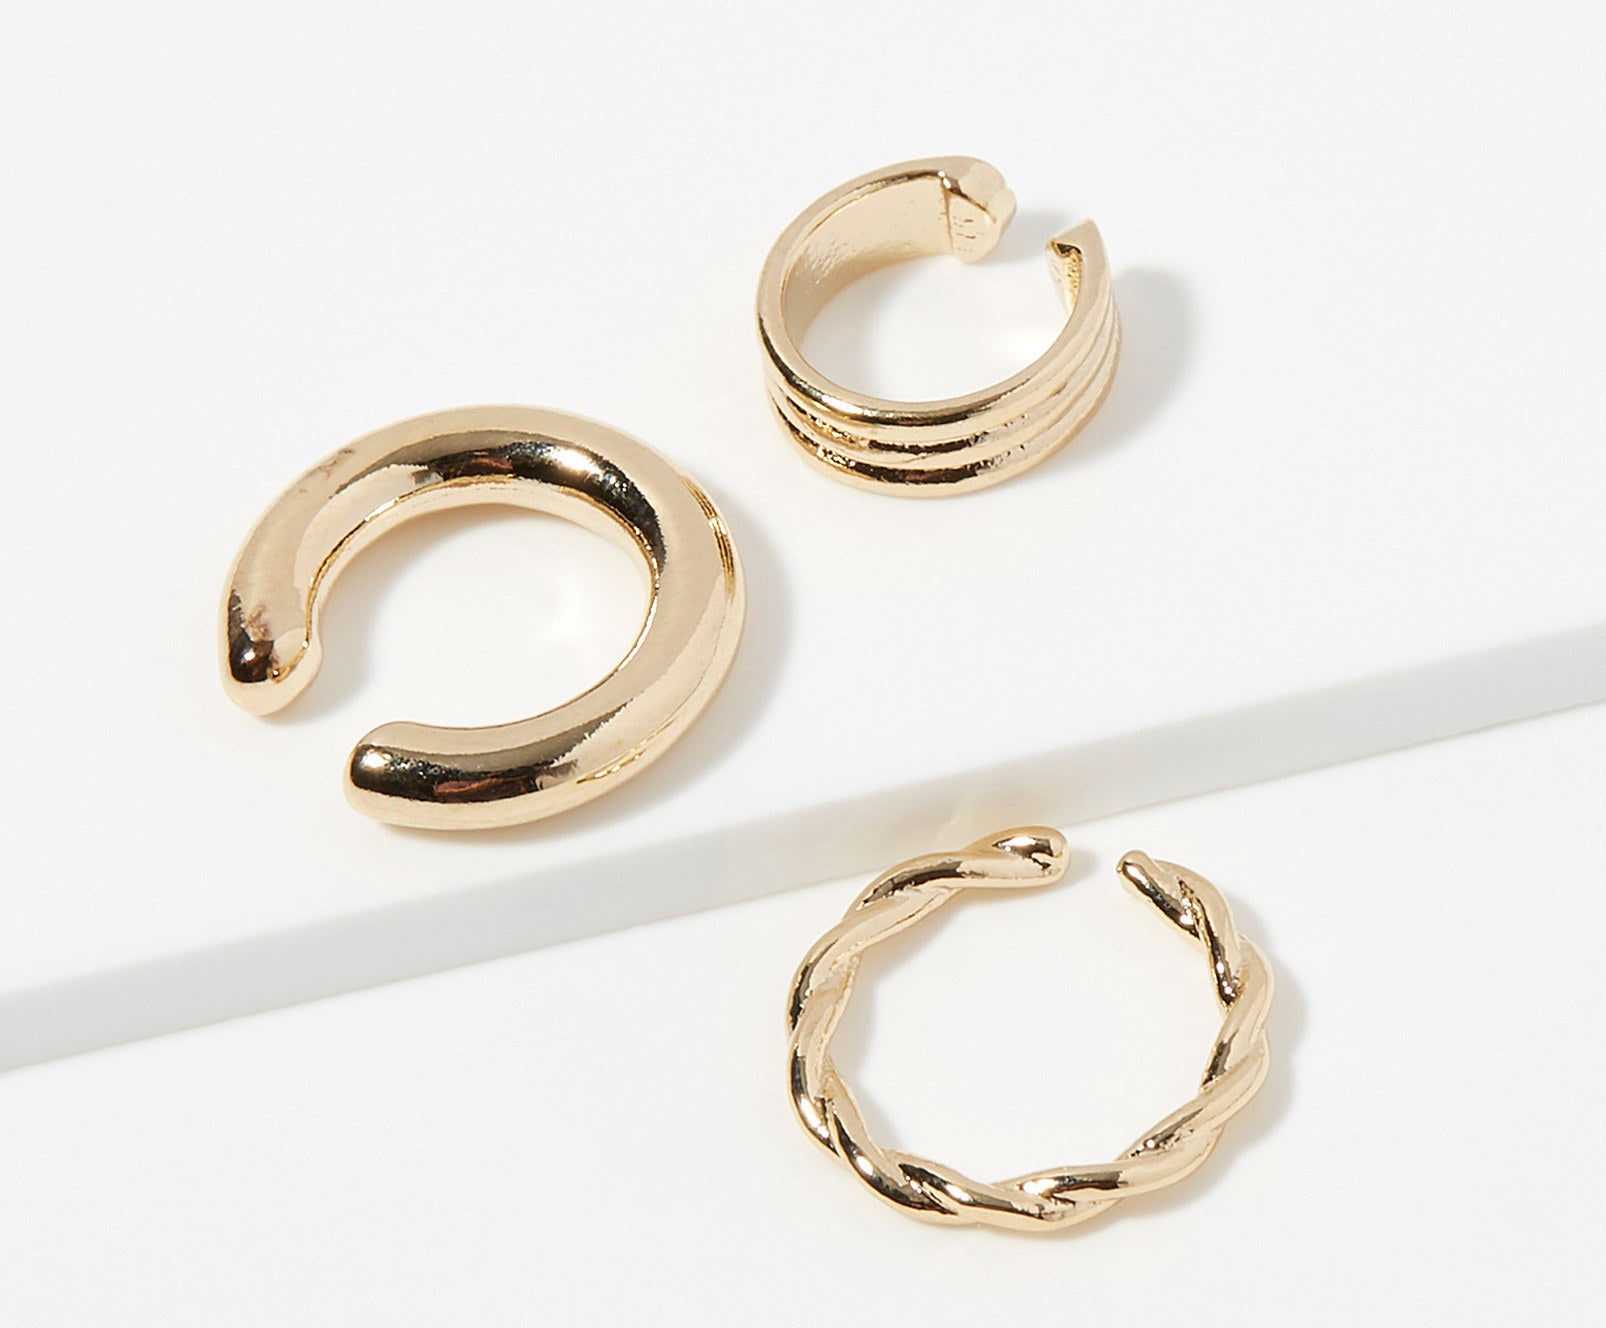 Three gold ear cuffs that are different sizes